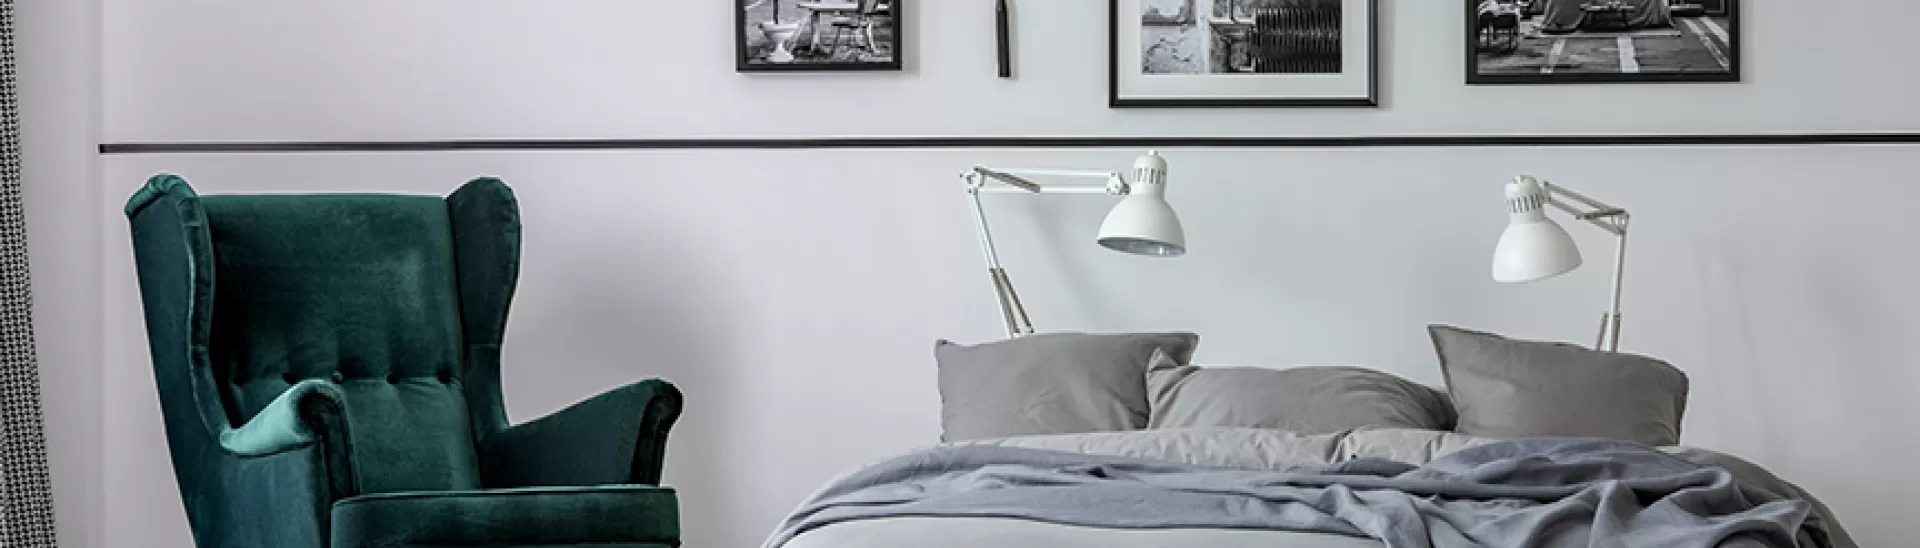 Transform Your Bedroom With These 5 Wall Decor Must-Haves